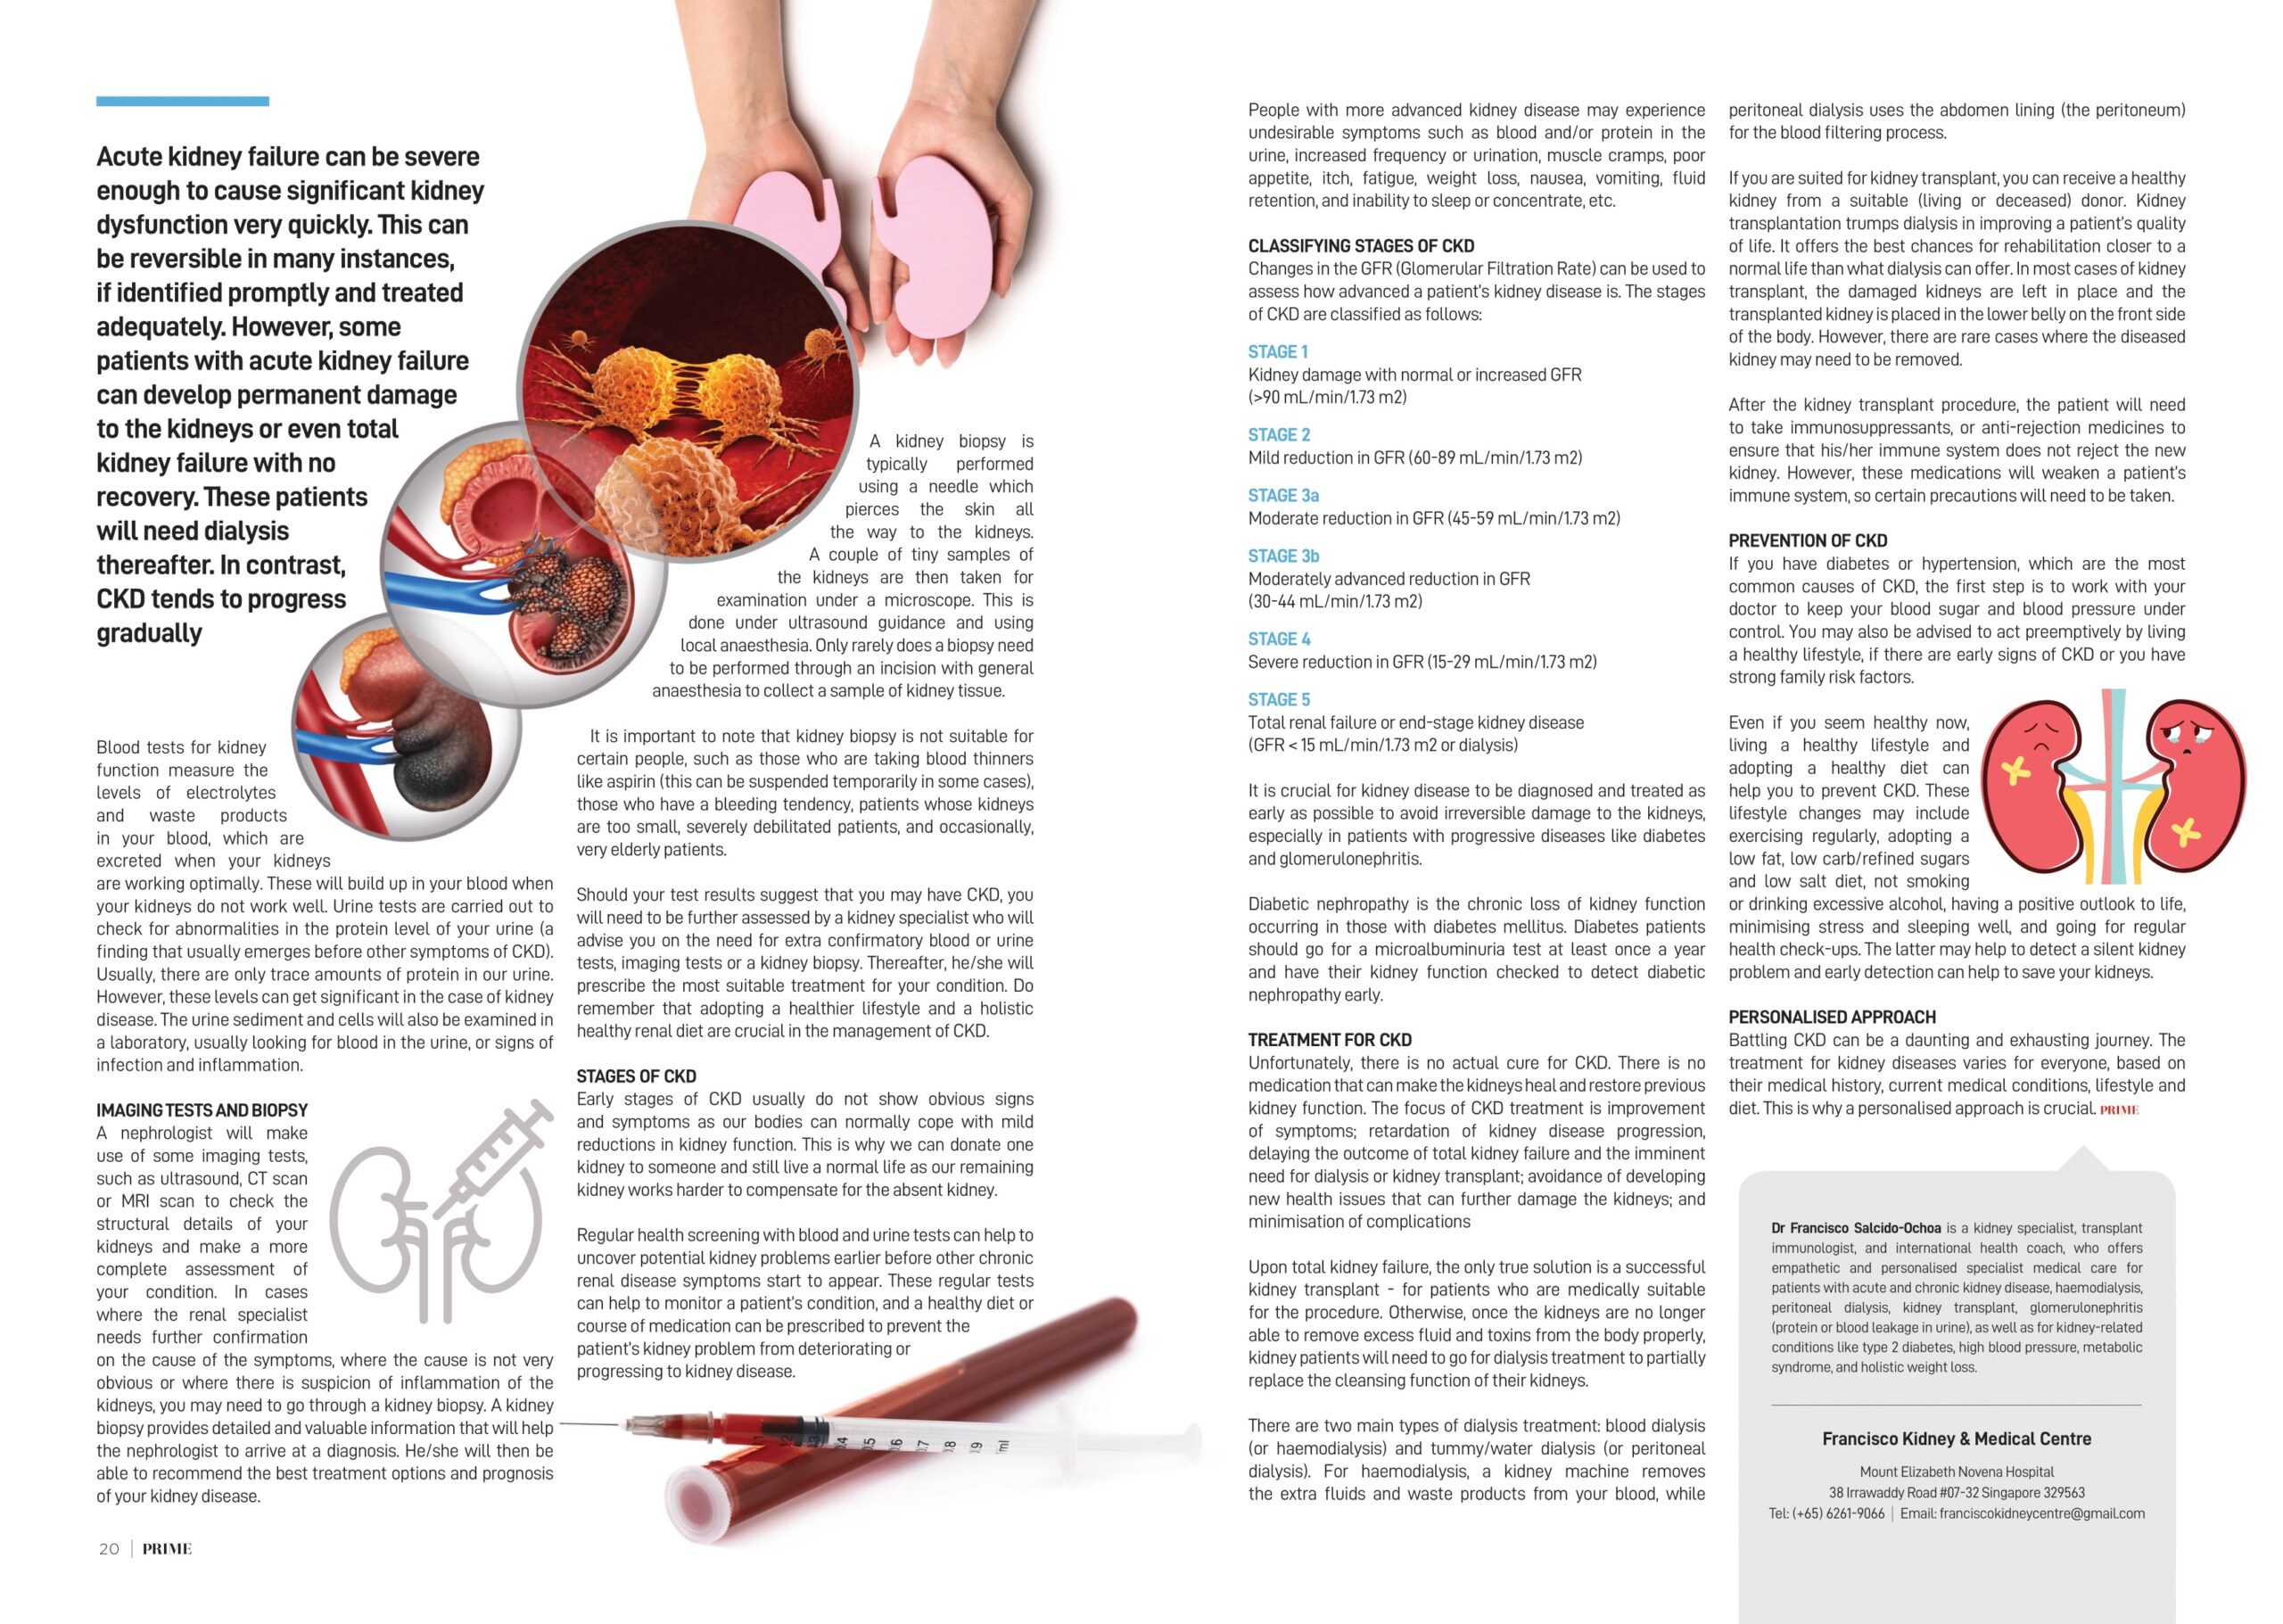 Chronic Kidney Disease (CKD) Article by Dr Francisco - Featured on Prime Magazine Singapore-pg2